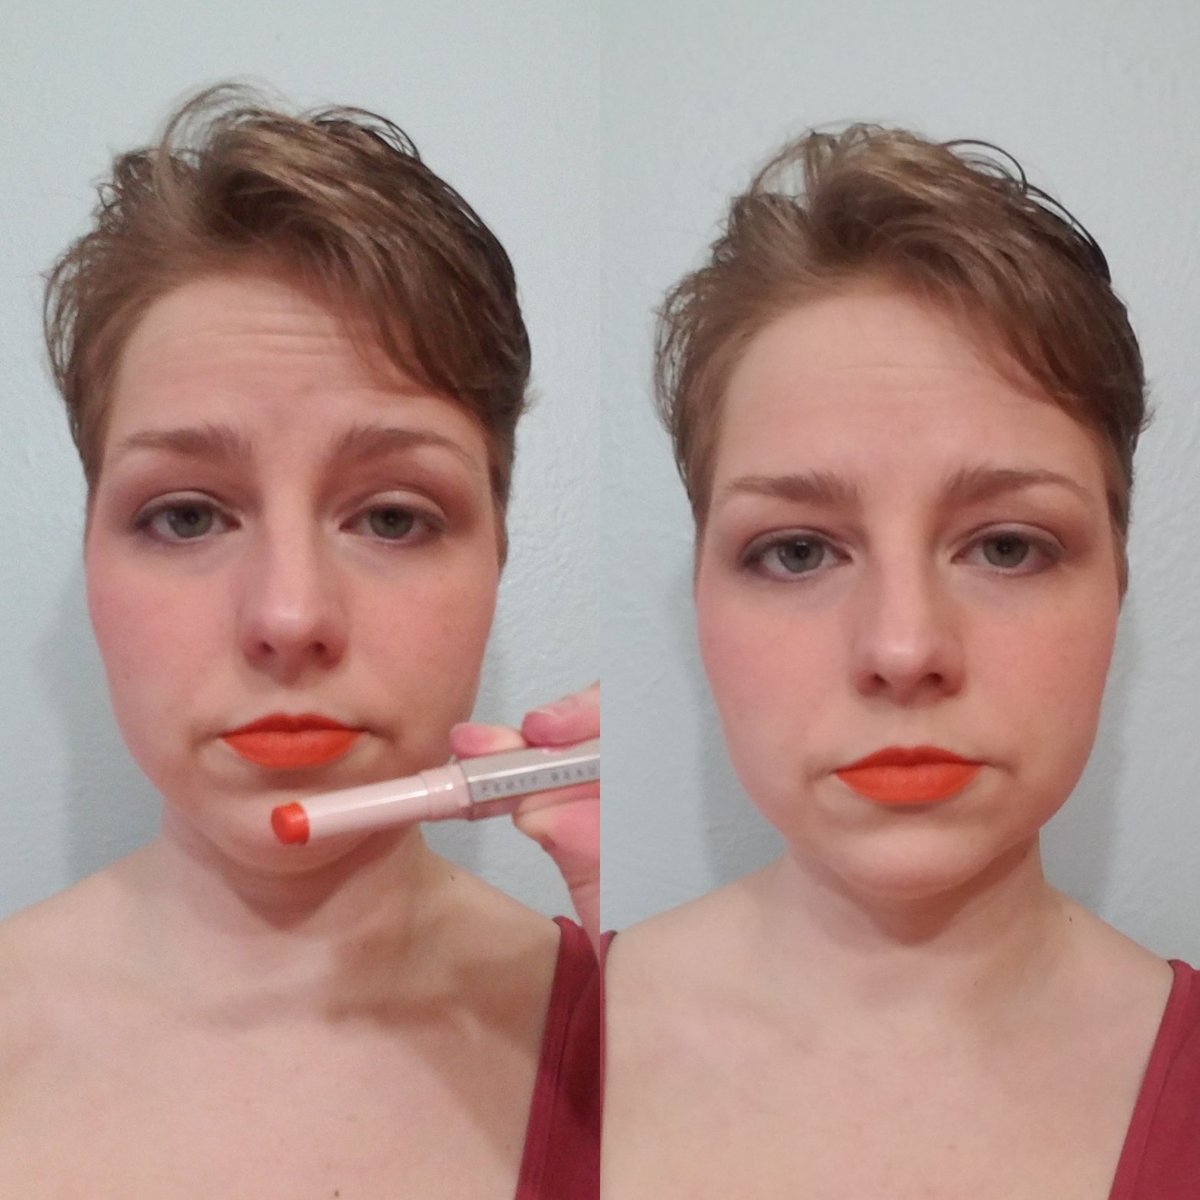 LipstickOops, I forgot a real "before" photo. Time elapsed: 21 minutes